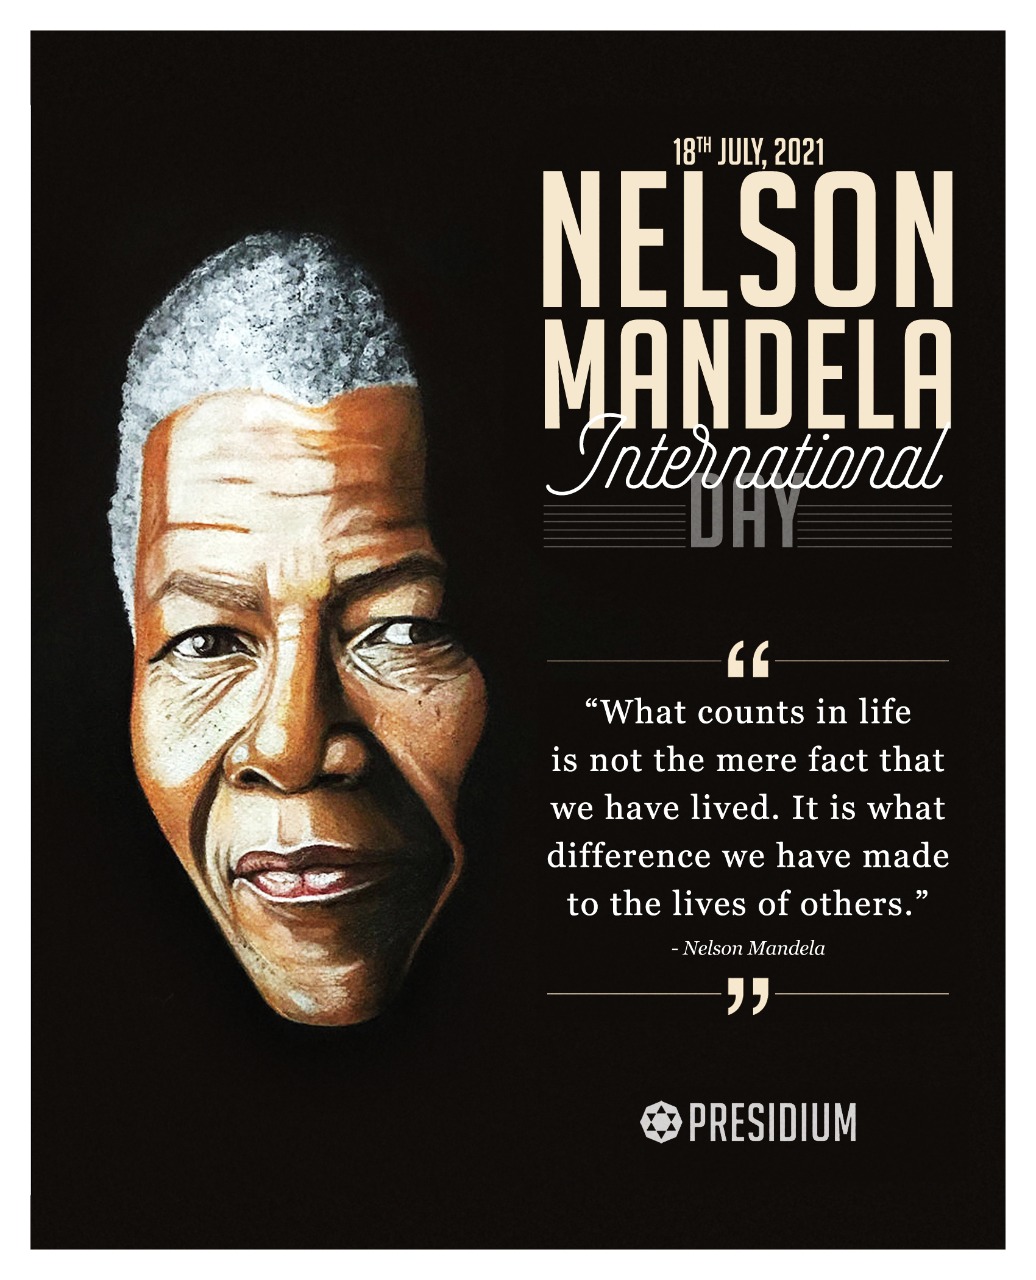 LET’S PROMOTE THE IDEALS REPRESENTED BY NELSON MANDELA!